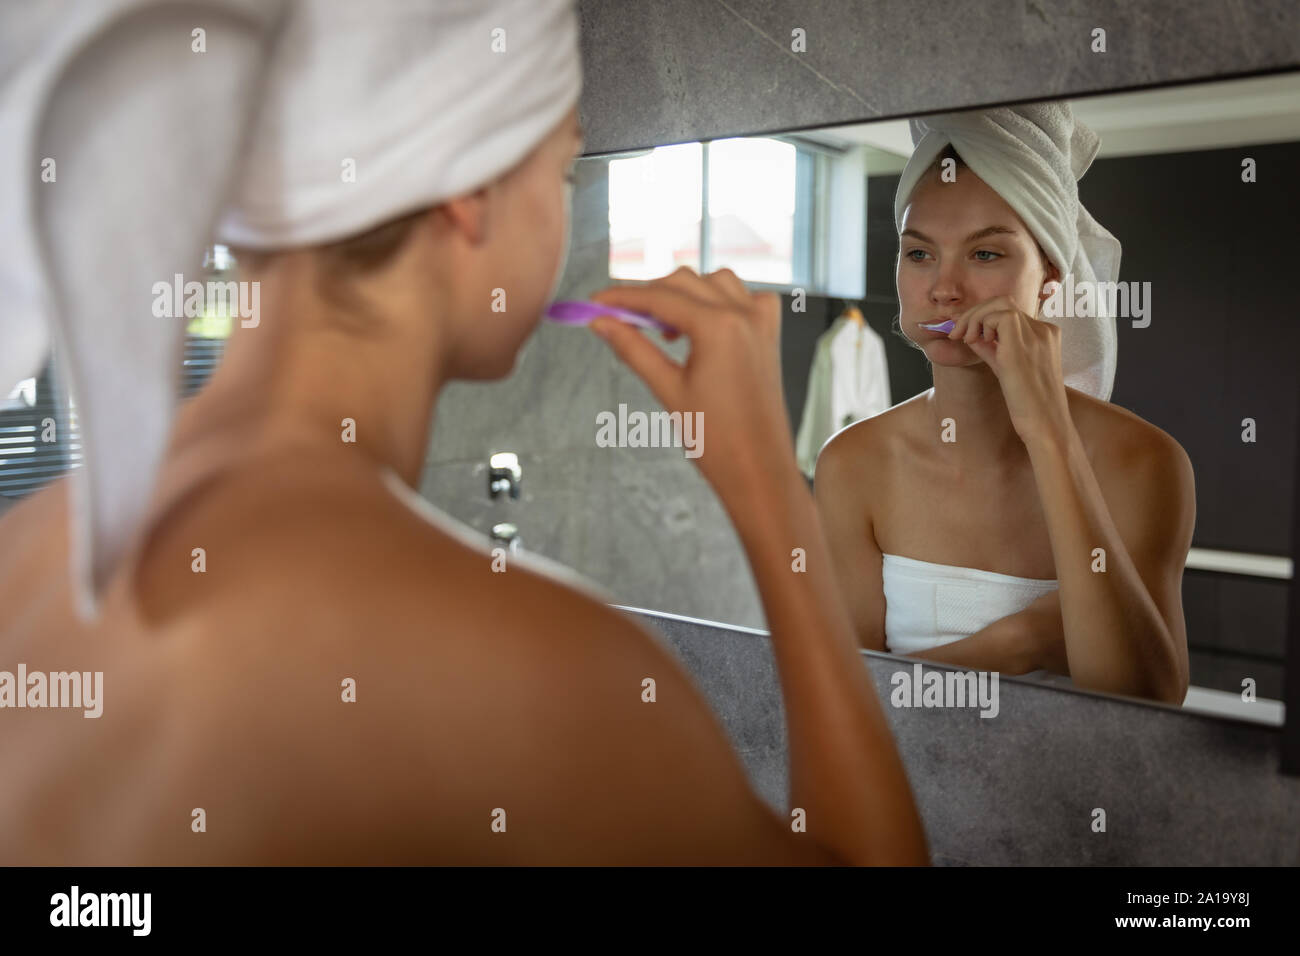 Young blonde woman brushing her teeth with her hair wrapped in a towel Stock Photo